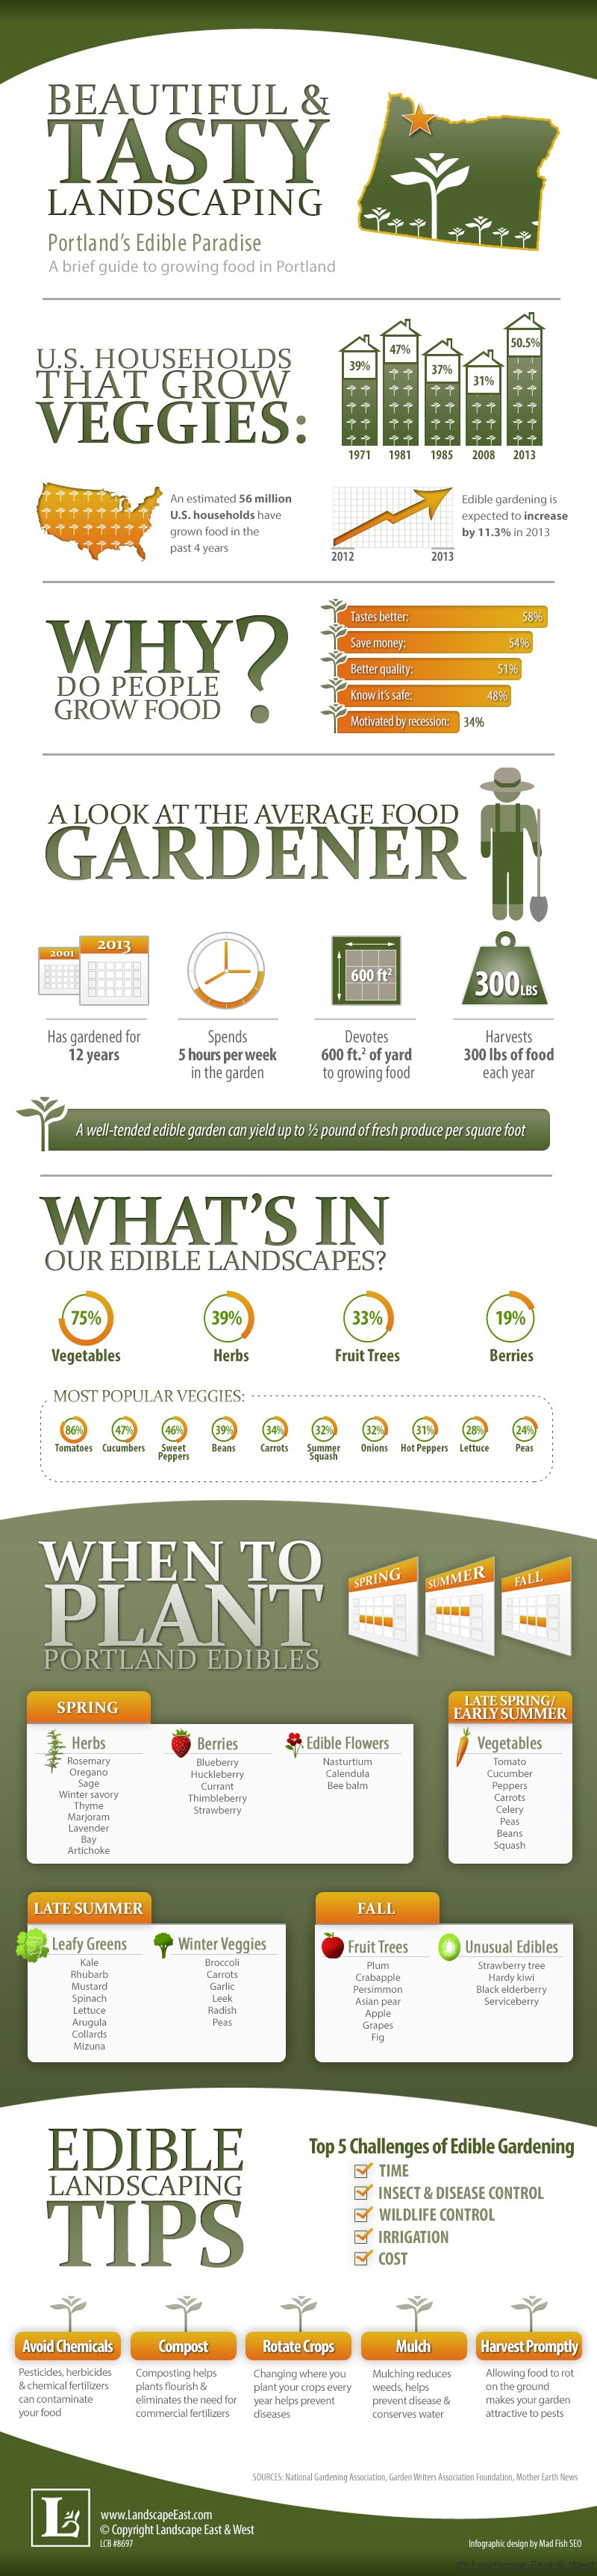 When it comes to beautiful landscaping, Portland, Oregon gardeners know a thing or two about how to keep their yards and gardens vibrant with color and blossoming with native plants. This infographic explores another area in which resident Portland landscaping experts have excelled – edible landscaping. Curious about what’s growing in our gardens, when to plant edibles, or just want some growing tips? Check out this infographic from Landscape East & West – it illuminates trends in landscaping, Portland, Oregon-style!